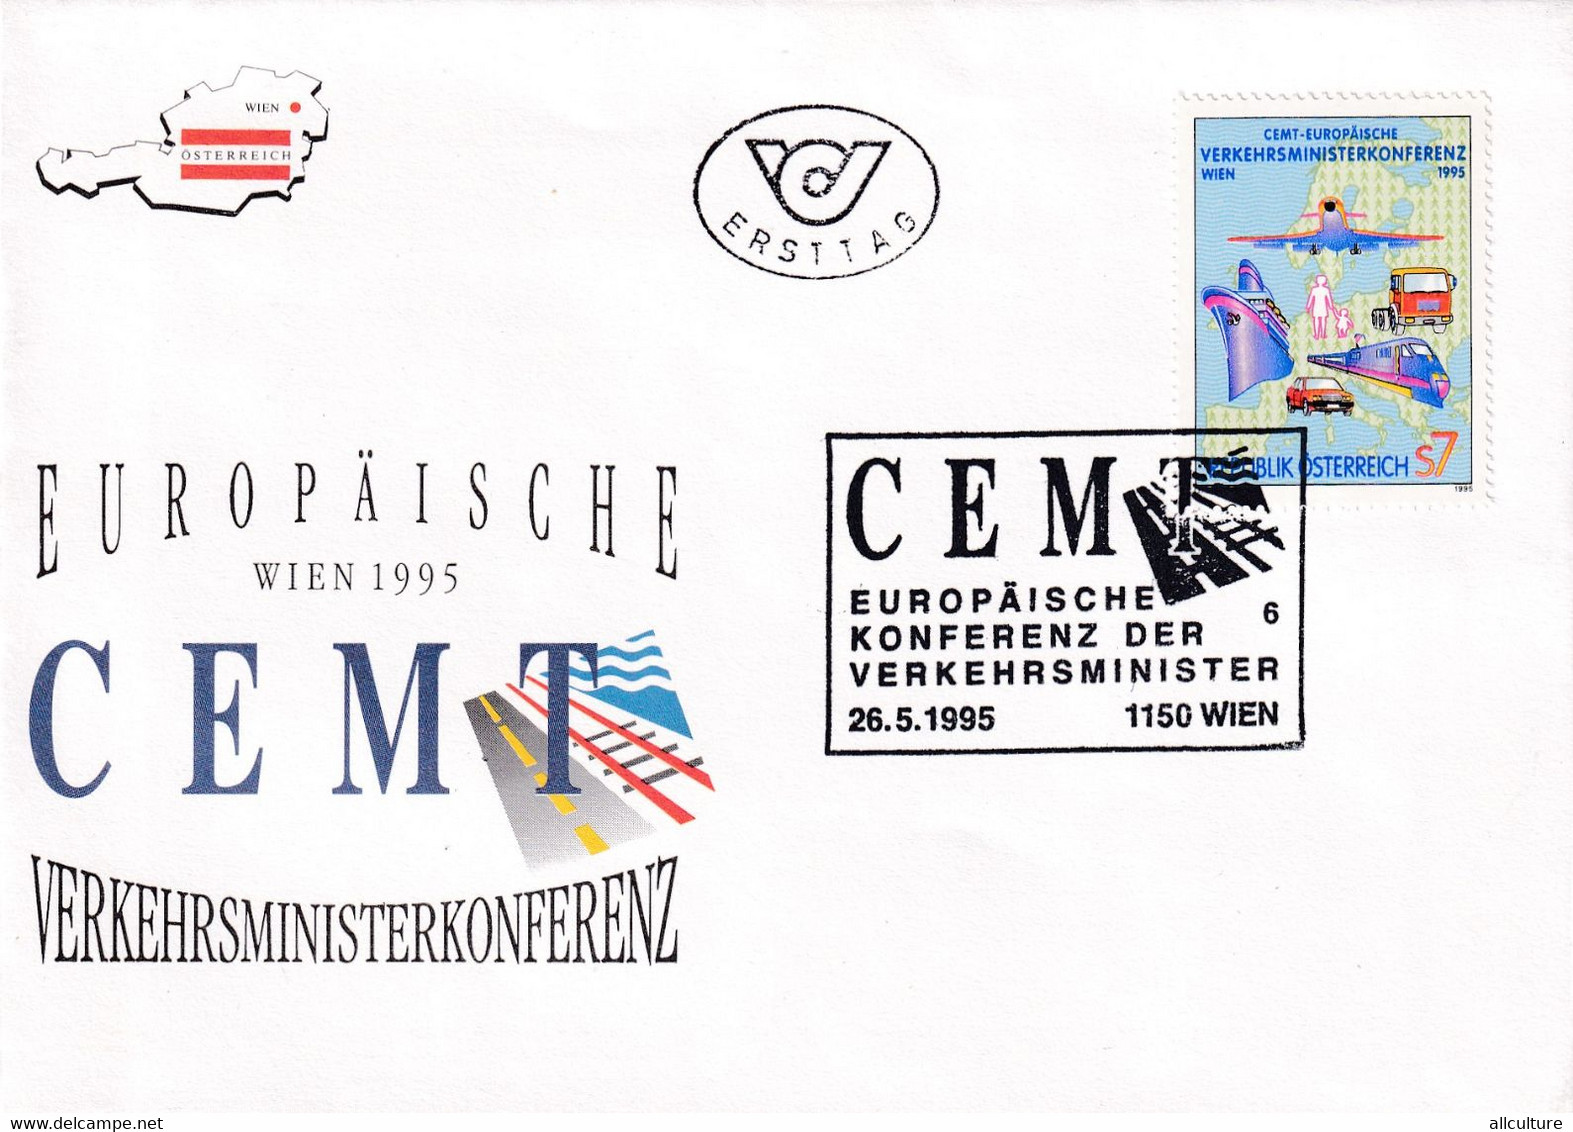 A8203- EUROPEAN CONFERENCE OF THE MINISTERS FOR TRANSPORT 1995  REPUBLIC OESTERREICH USED STAMP ON COVER AUSTRIA - Covers & Documents